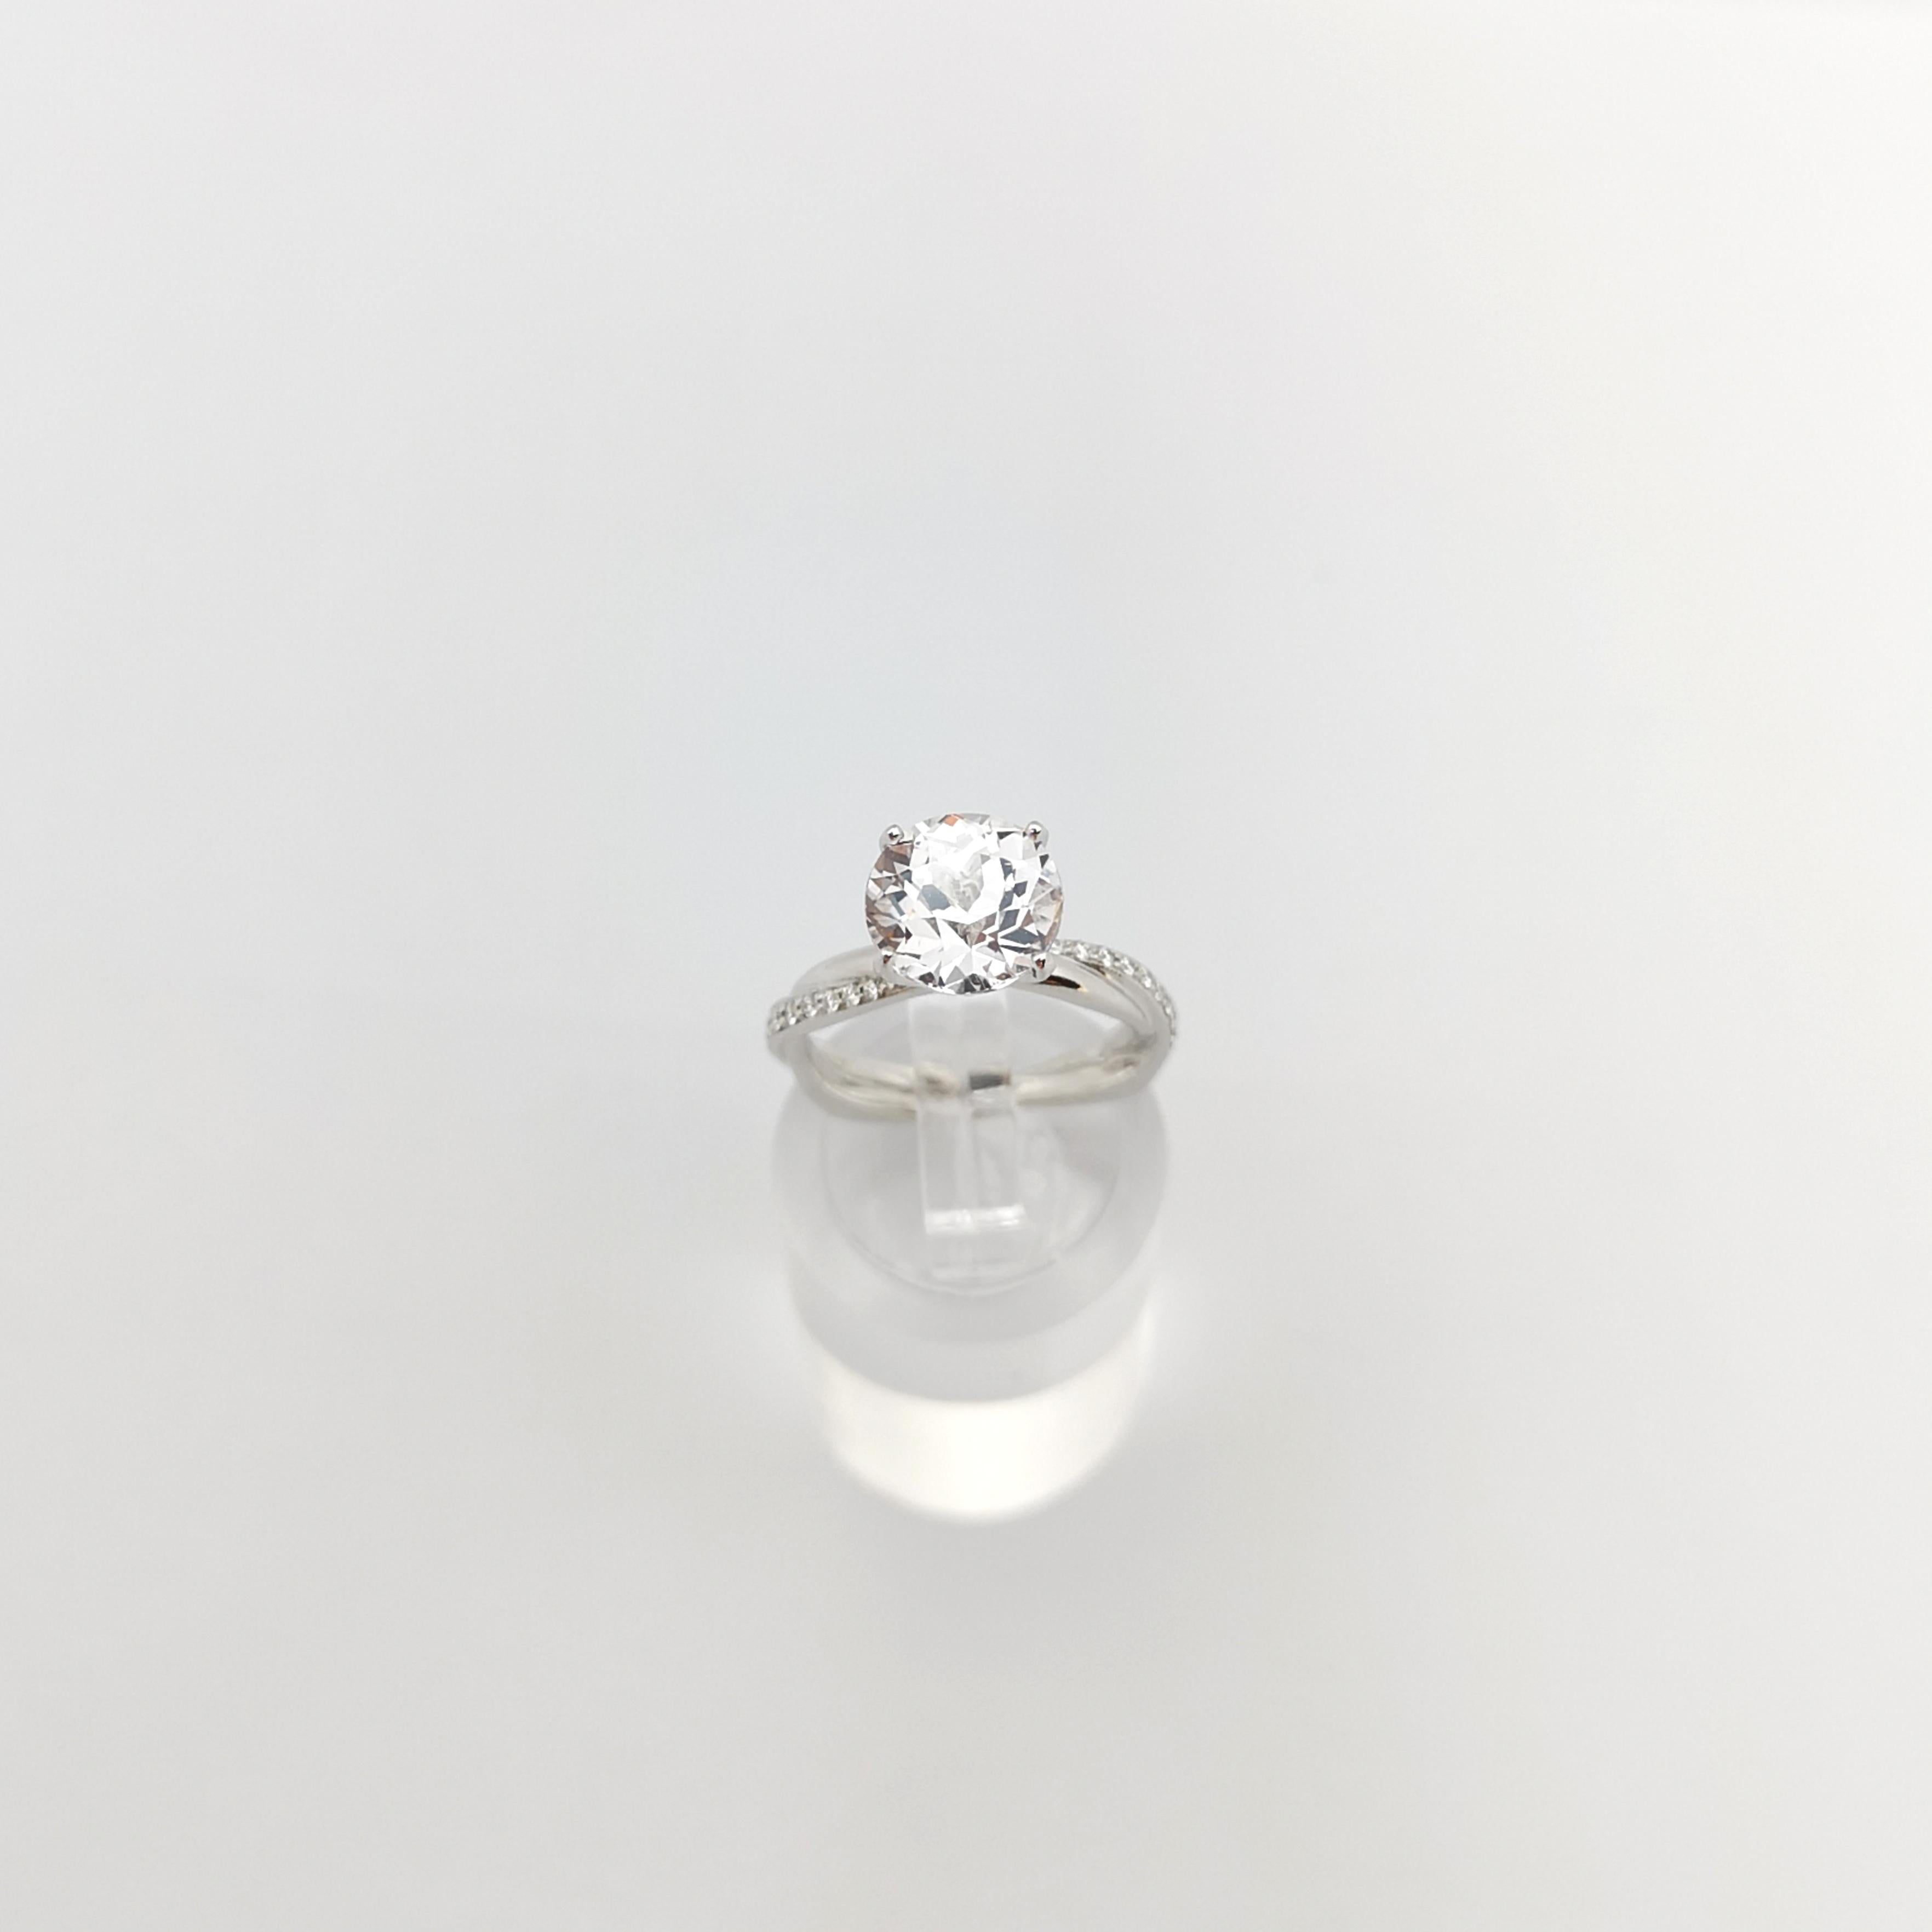 Certified Unheated 3 Carats White Sapphire with Diamond Ring in Platinum 950  For Sale 7